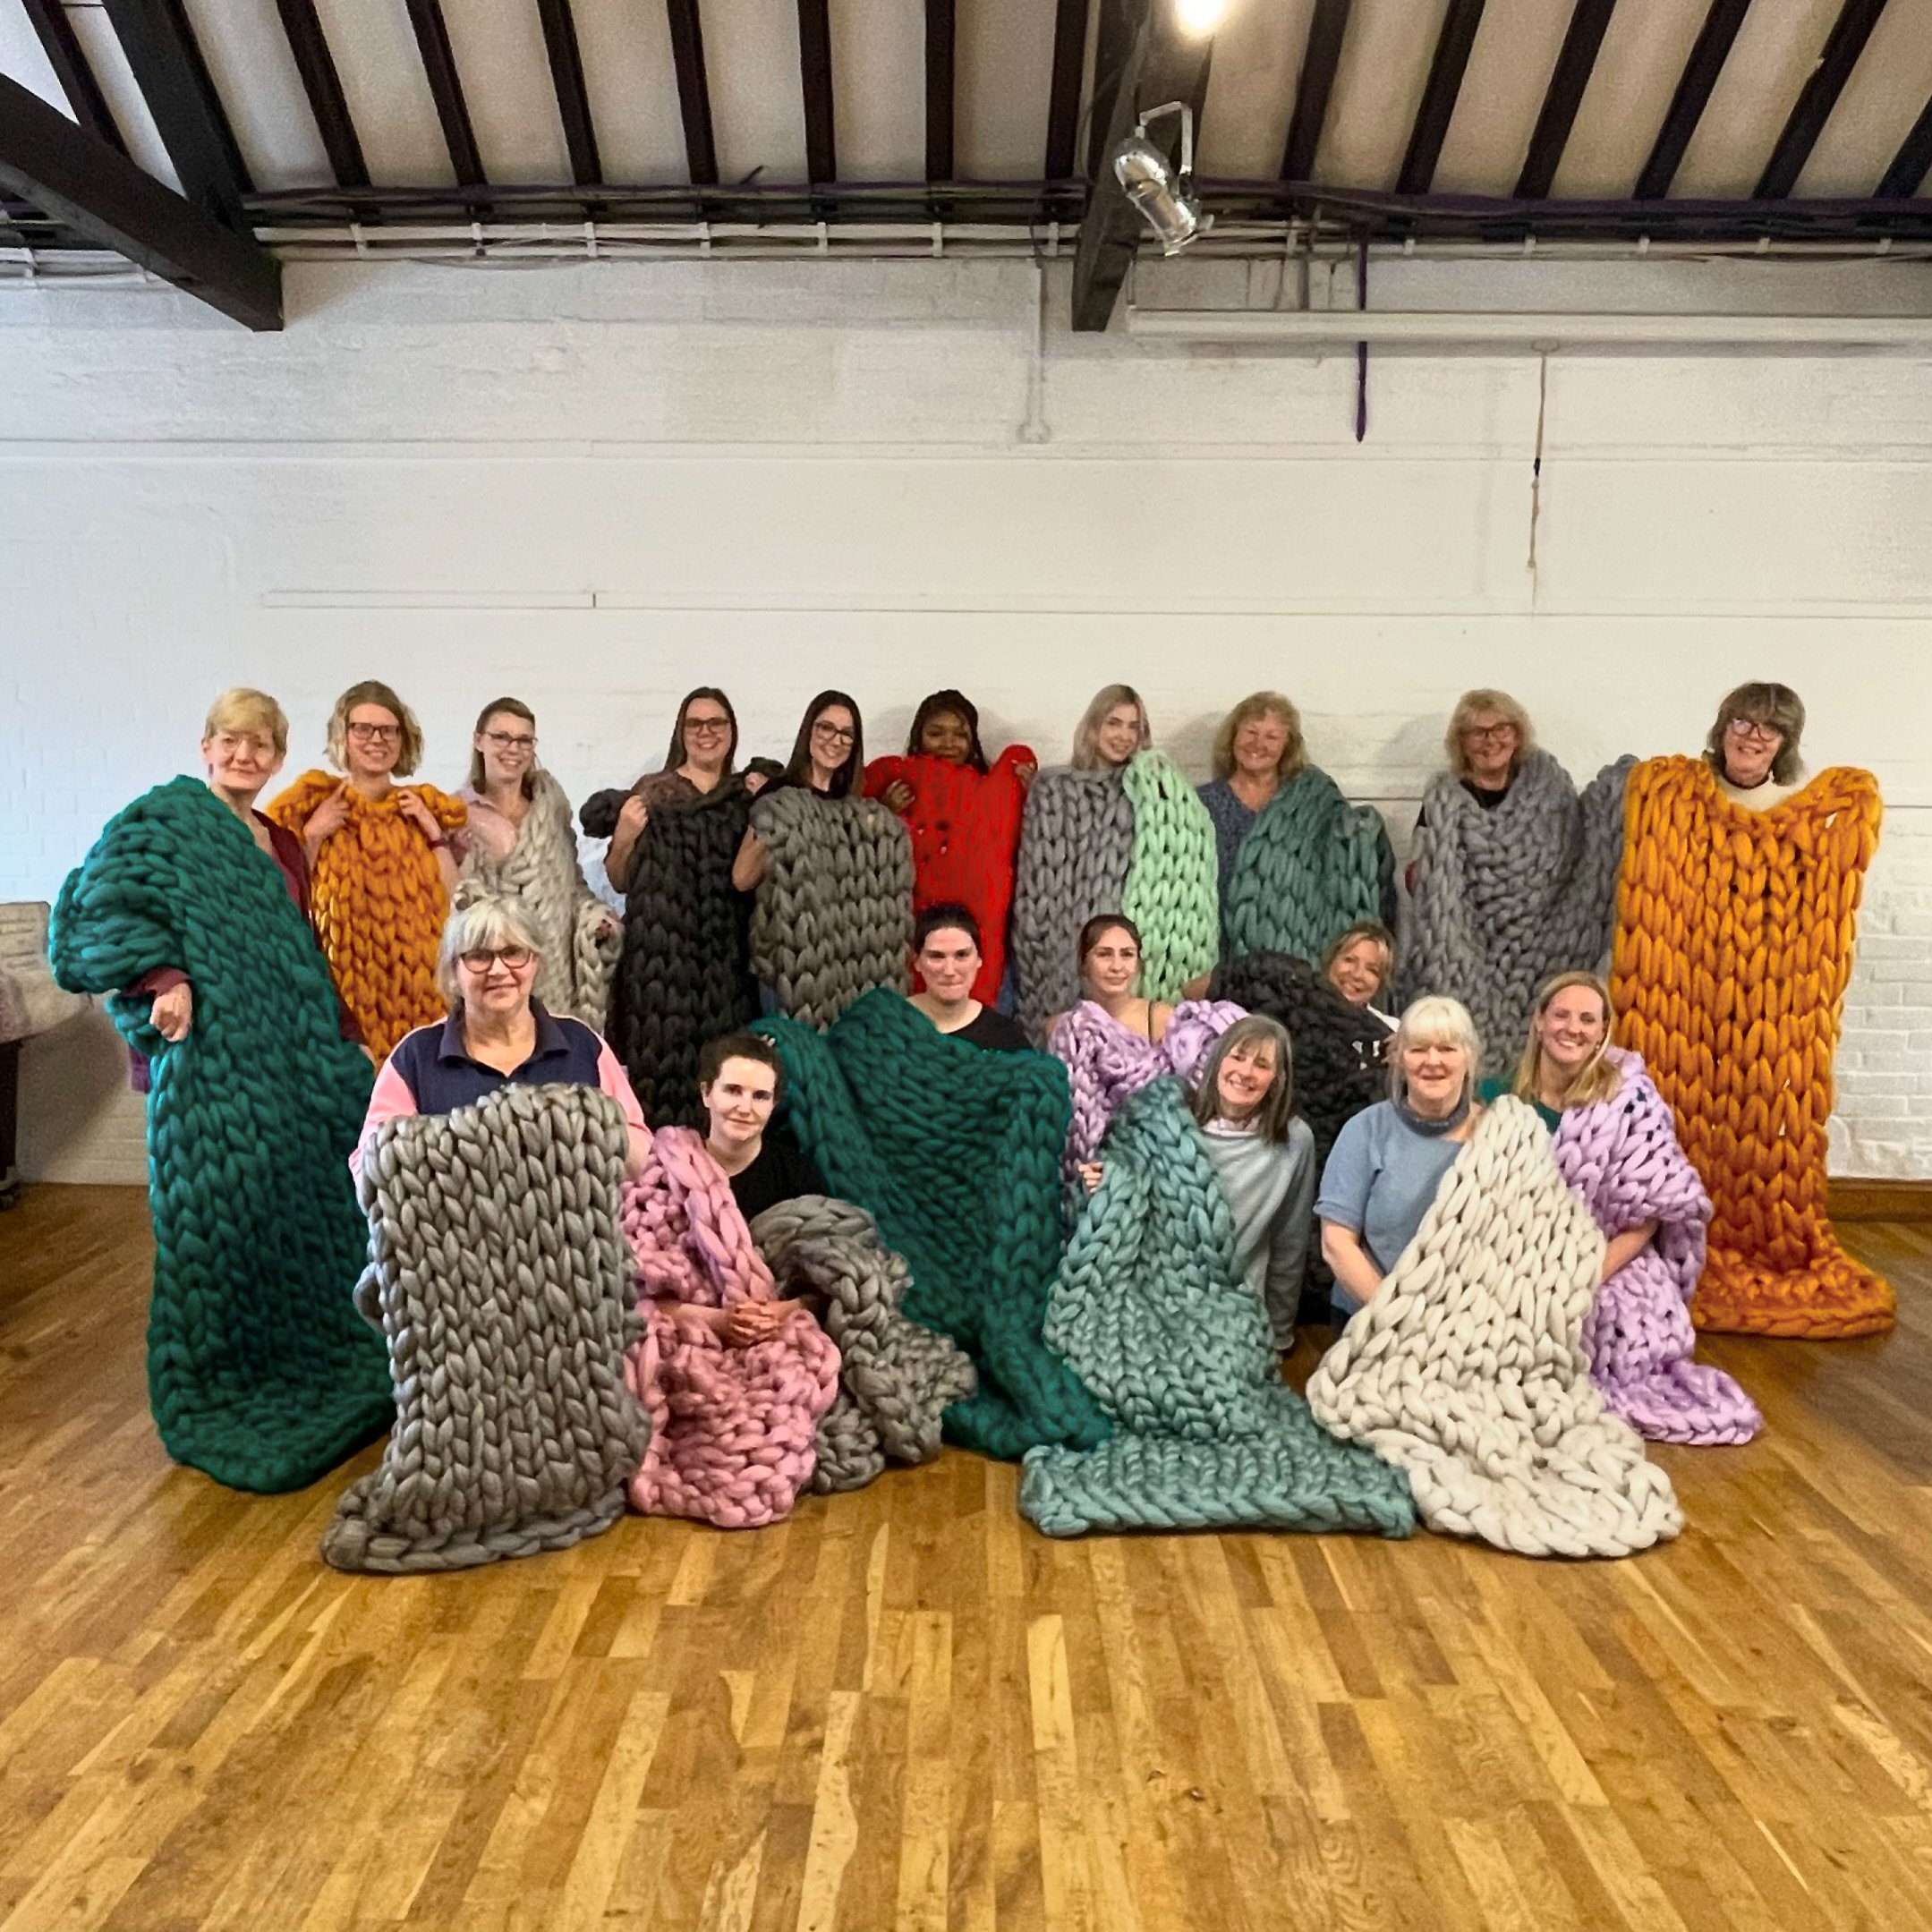 Wonderful Workshop this morning @farnhammaltingscraft . 

21 Blankets were created from these lovely crafters who were complete beginners, using there ARMS ! Yes ARMS as needles ! 

Our Next Arm Knit Blanket Workshops are @thesunbury_gallery SAT 8th 